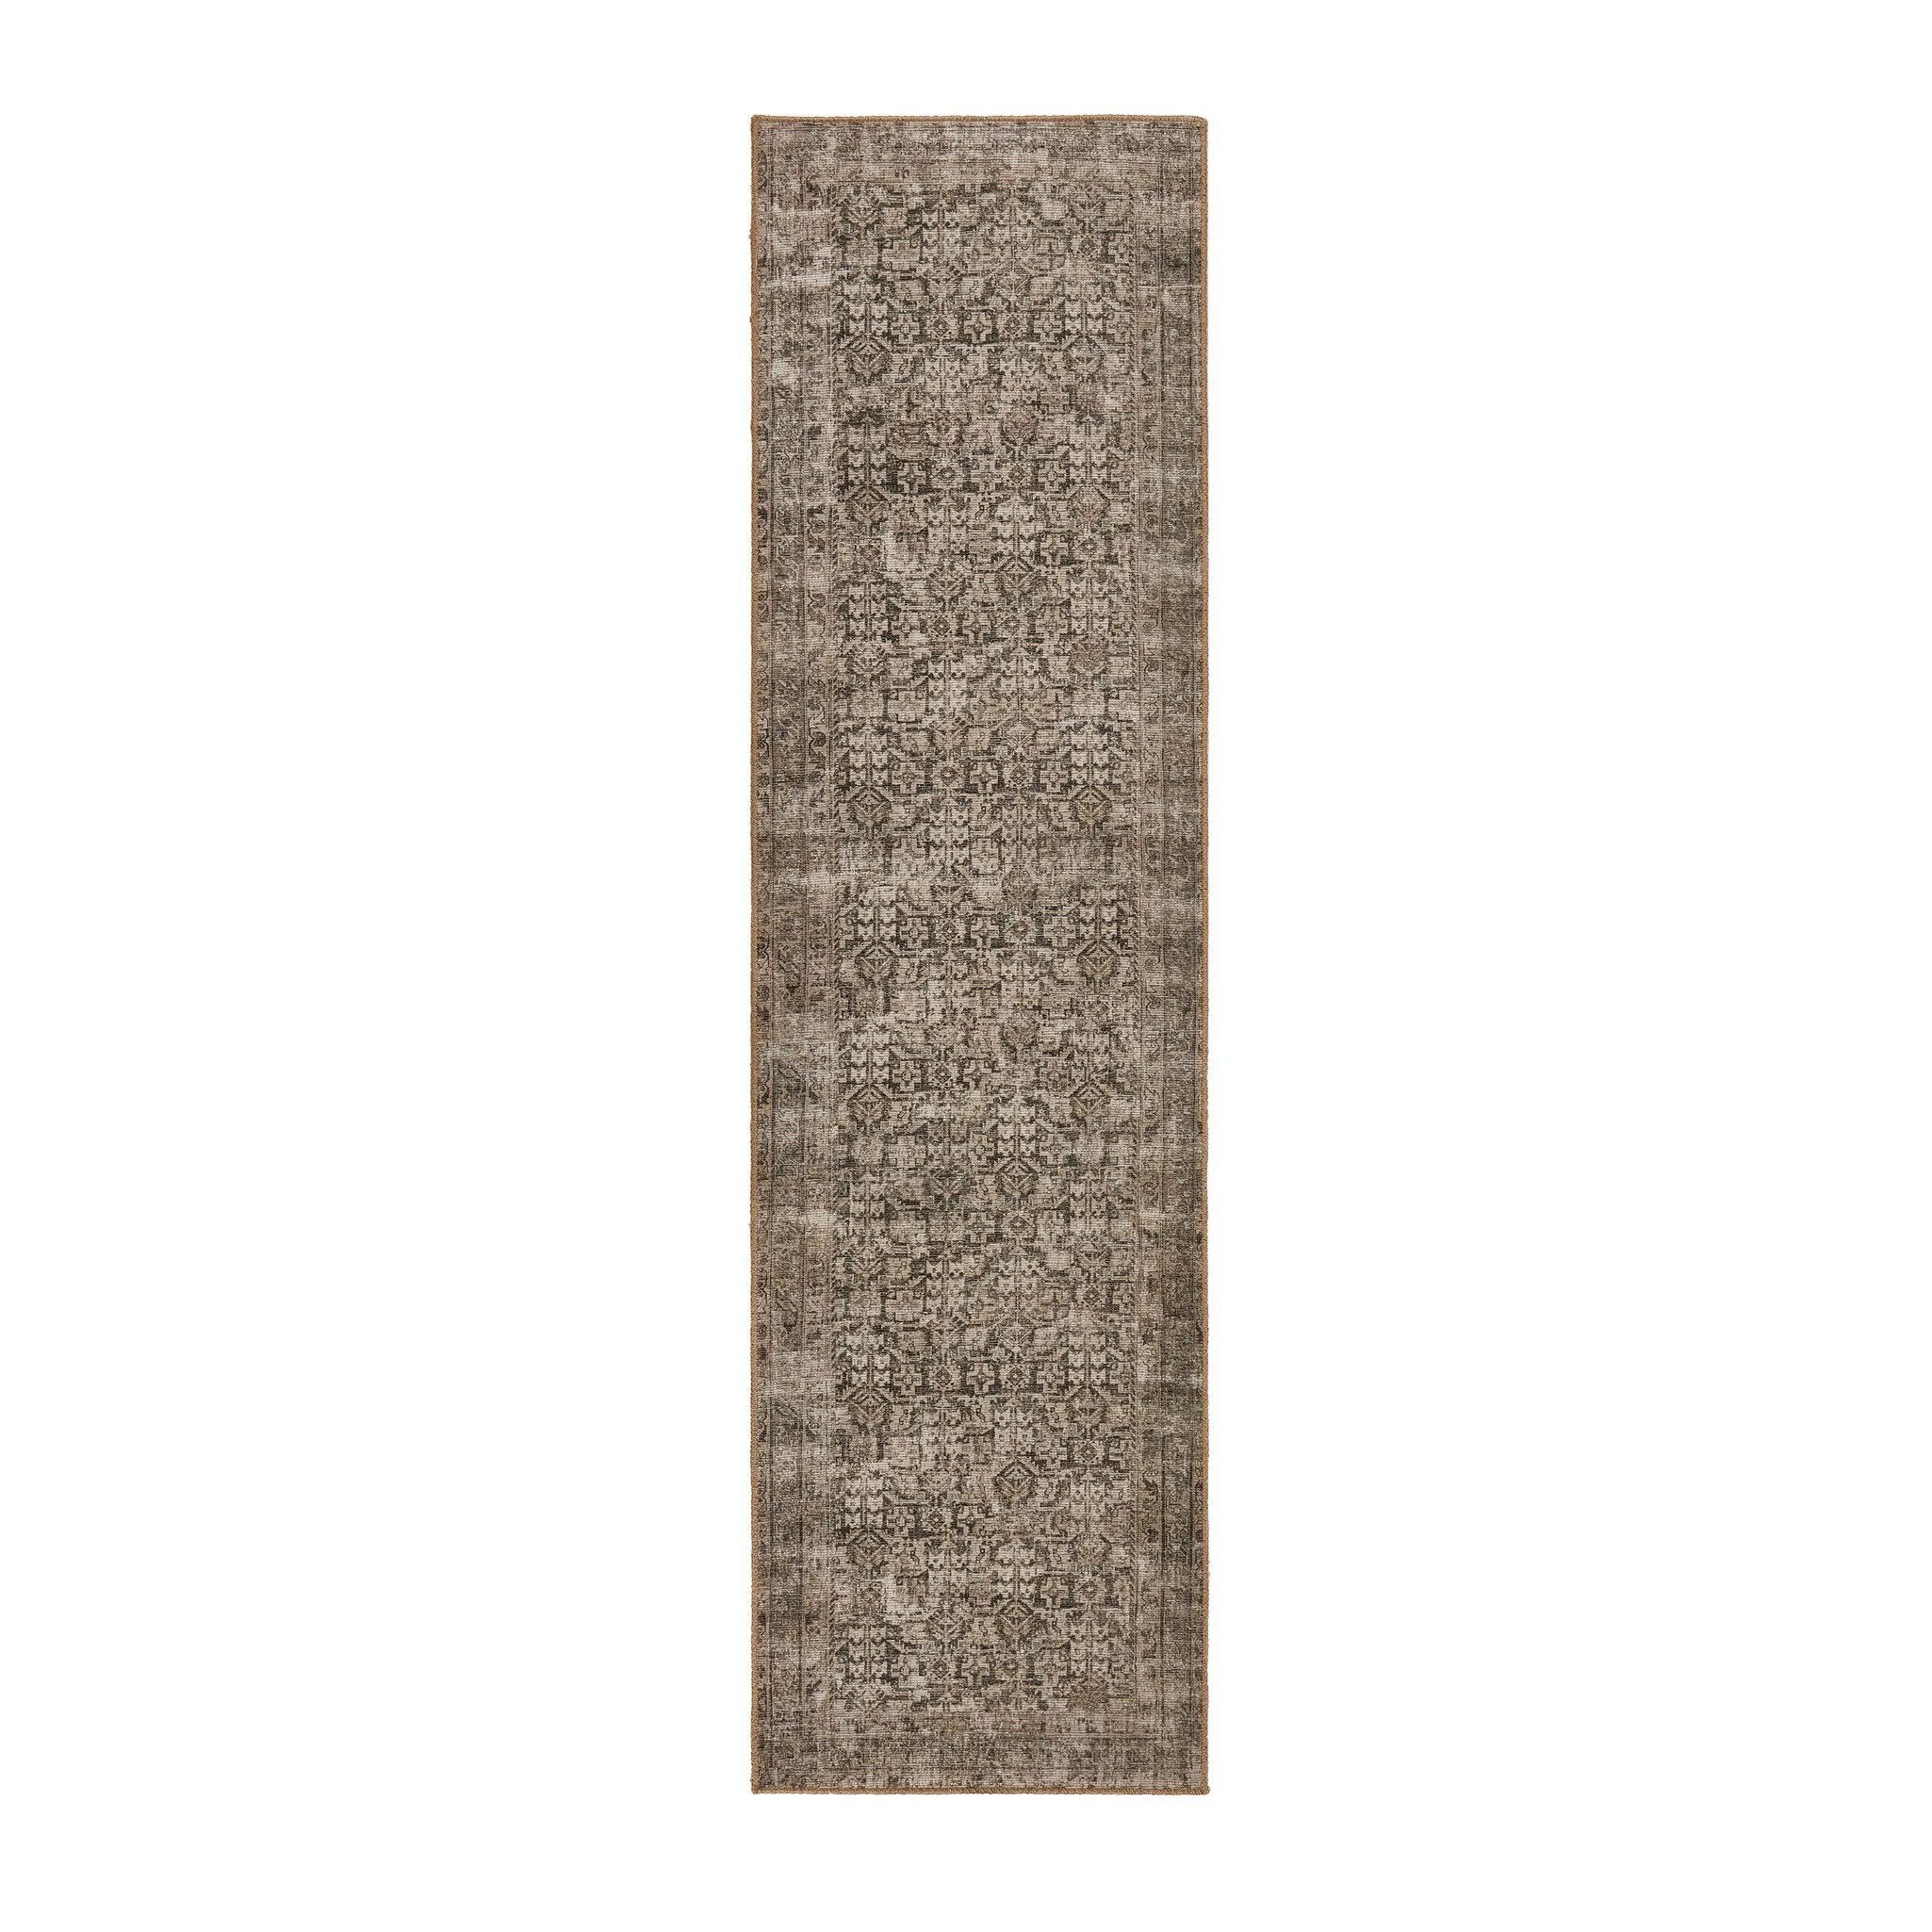 Power-loomed in Egypt, a textural jute-blend area rug is printed to mimic an authentic vintage rug design.Overall Dimensions30.00"w x 0.50"d x 90.00"hFull Details &amp; SpecificationsTear SheetCleaning Code : X (vacuum Or Light Brush, No Cleaning Products Amethyst Home provides interior design, new home construction design consulting, vintage area rugs, and lighting in the Winter Garden metro area.